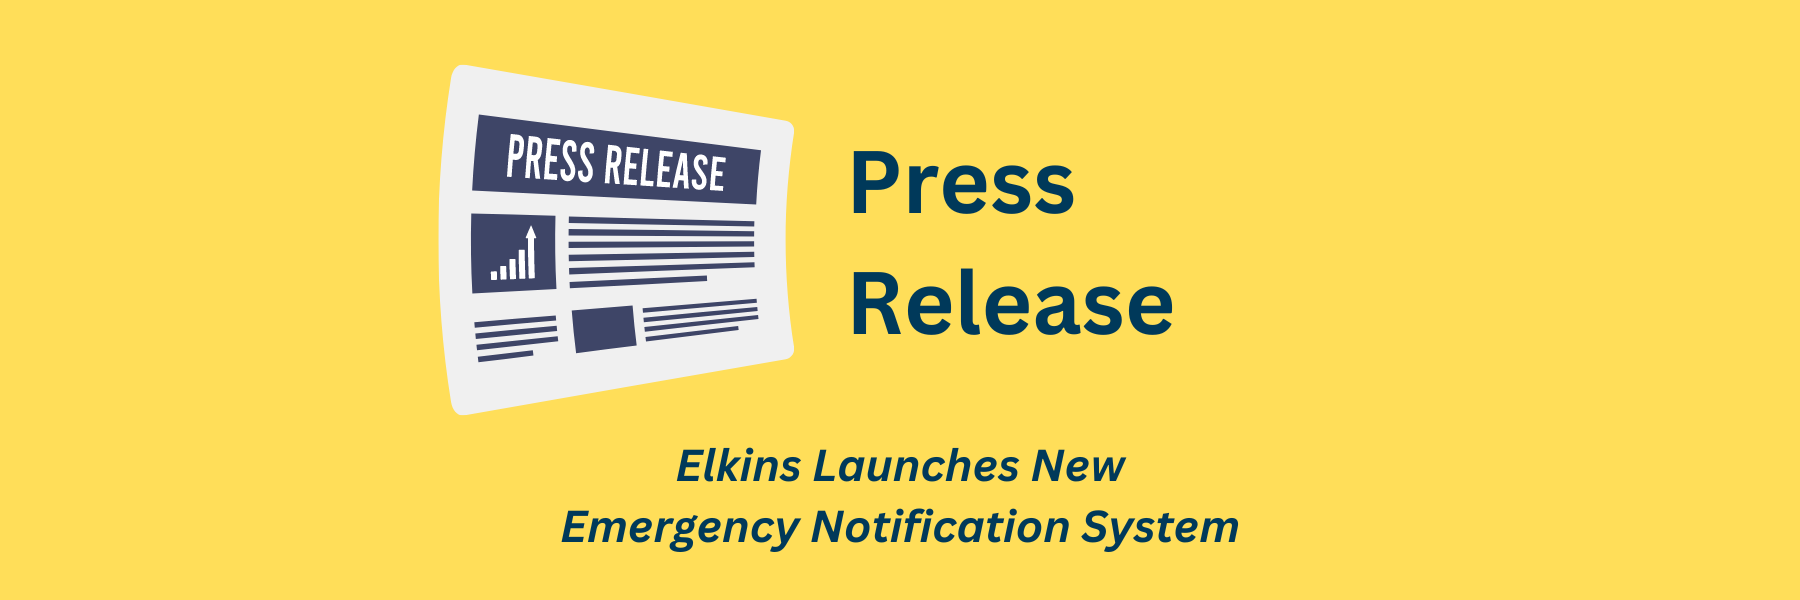 Elkins Launches New Emergency Notification System